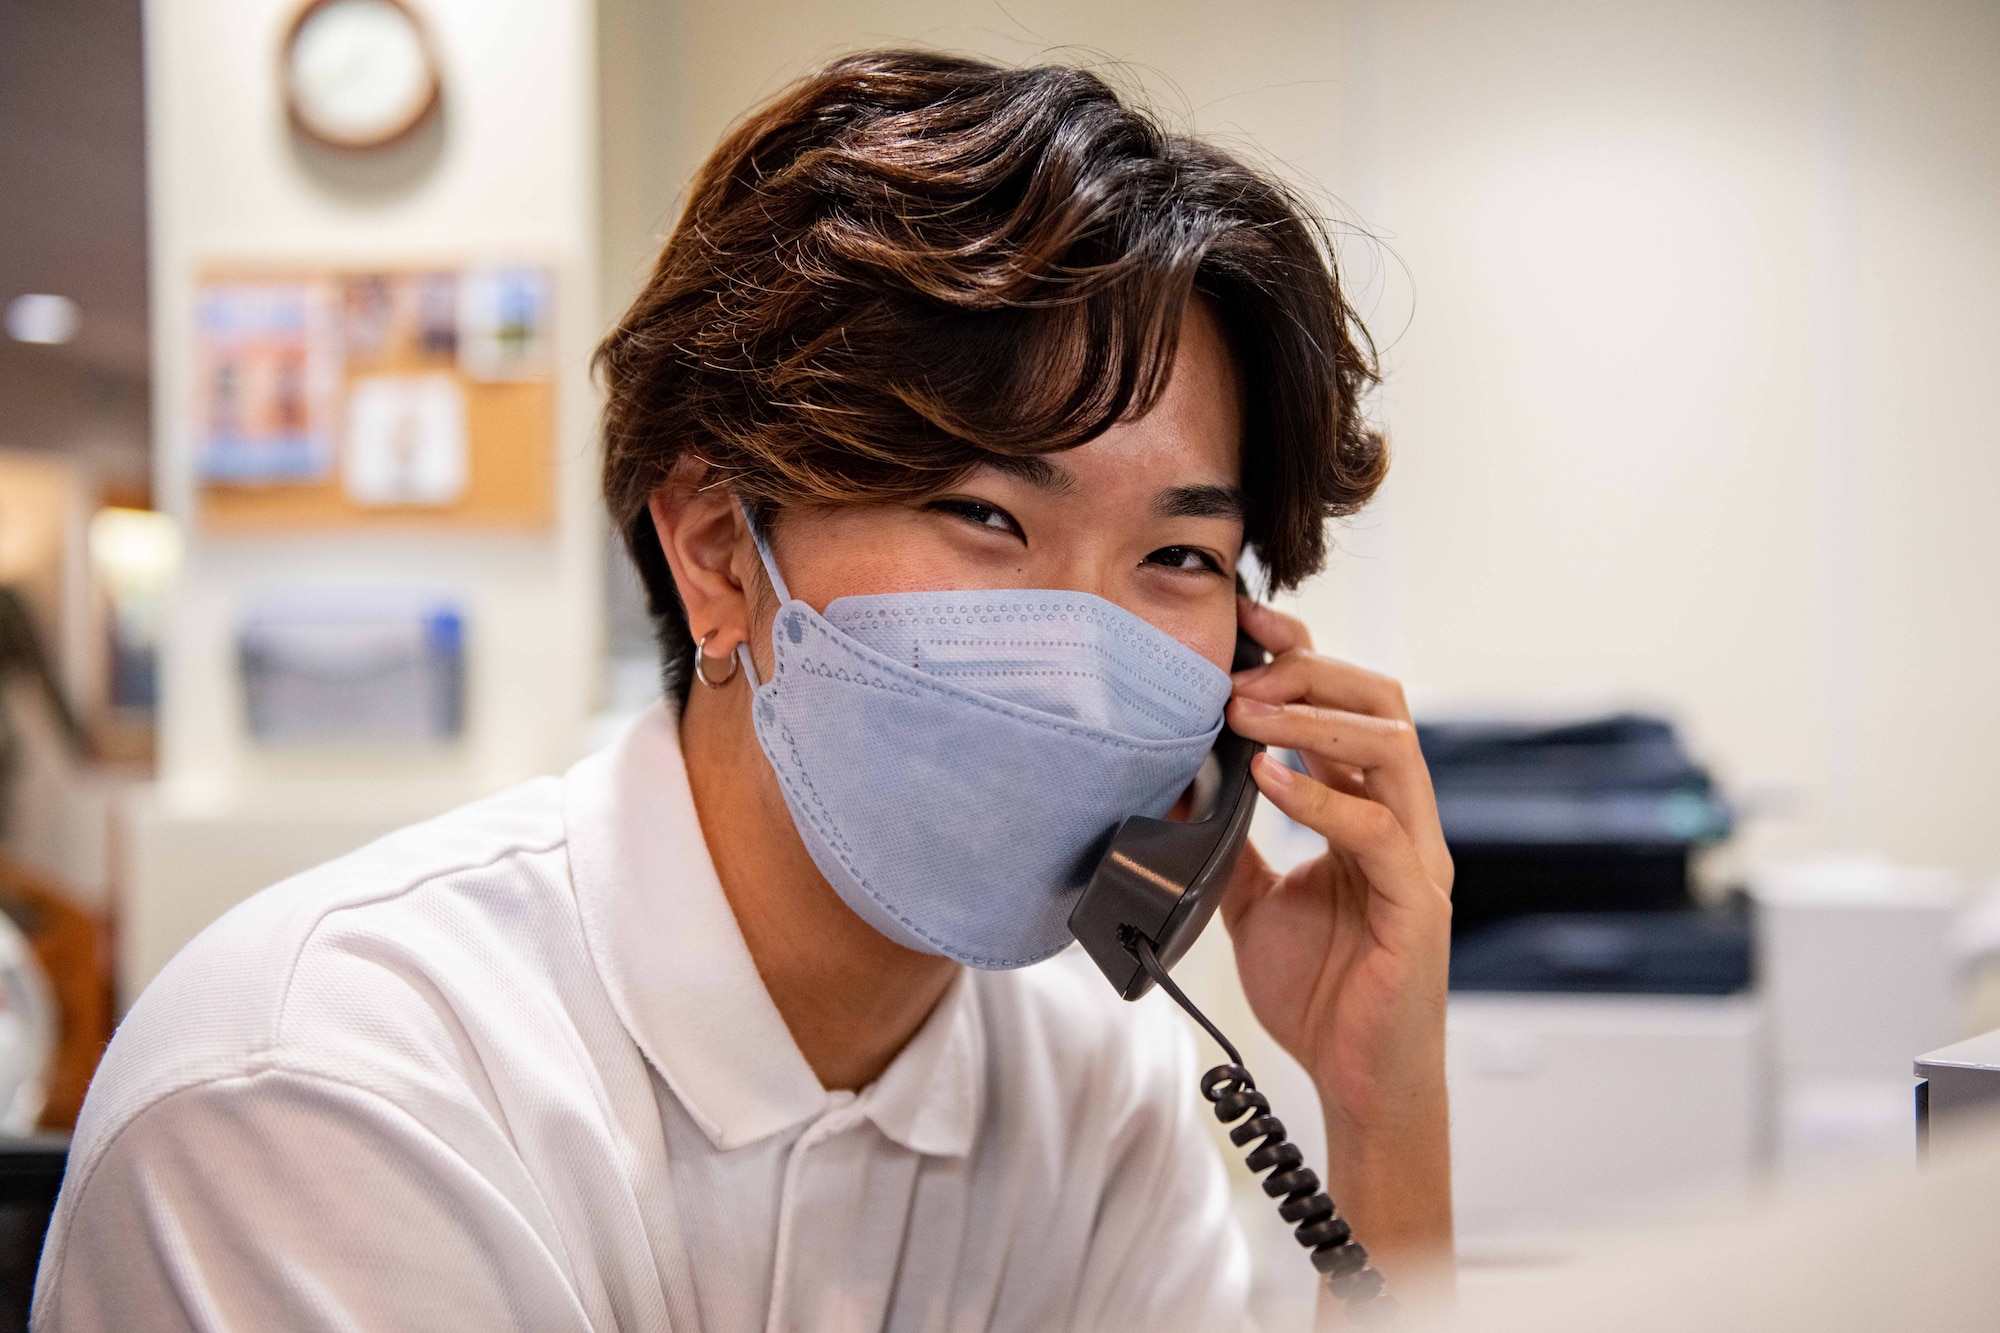 A Japanese boy smiles at the camera as he takes a call at the front desk